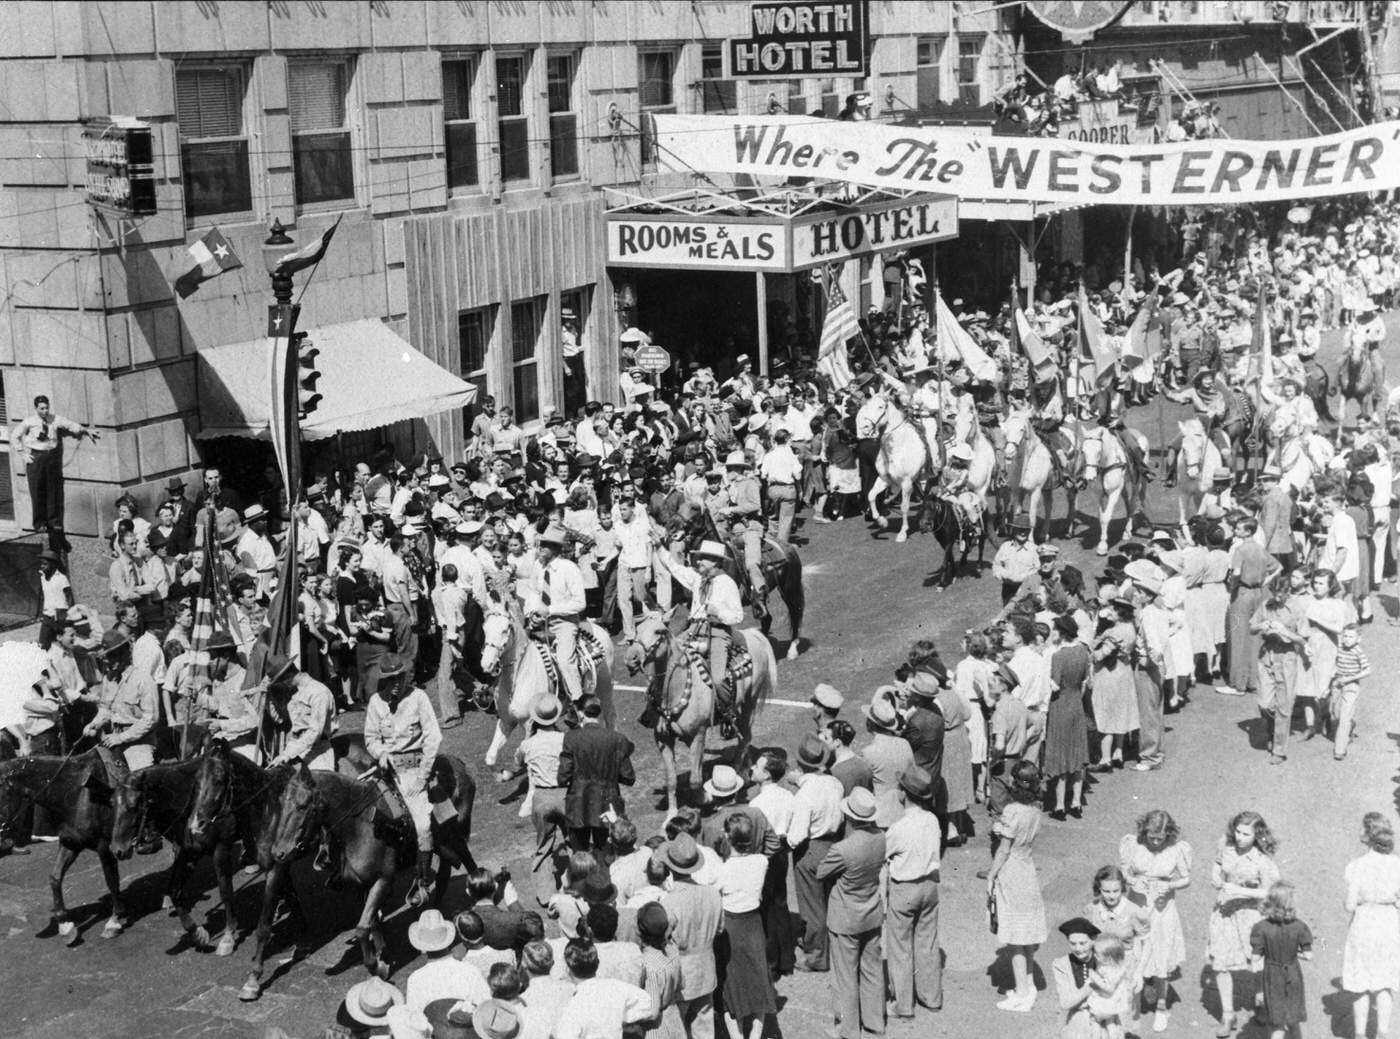 Parade through downtown Fort Worth in front of the Worth Hotel to celebrate the movie premier of "The Westerner"1940